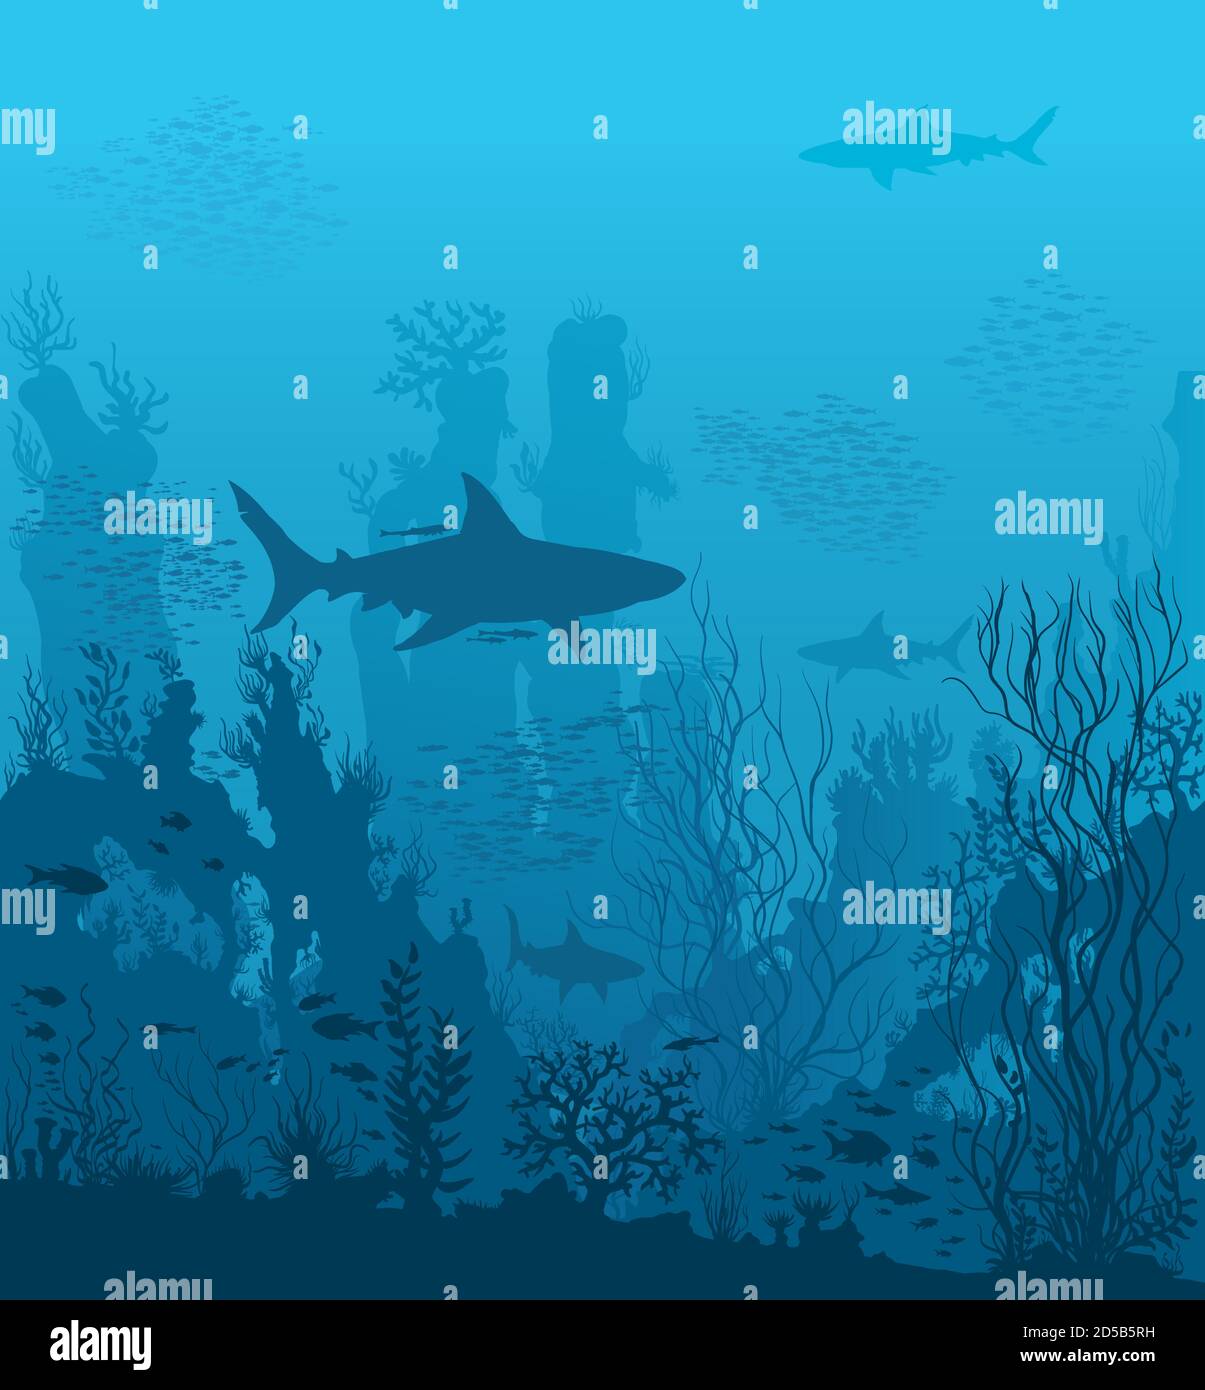 Blue underwater landscape with sharks and coral reefs Stock Vector